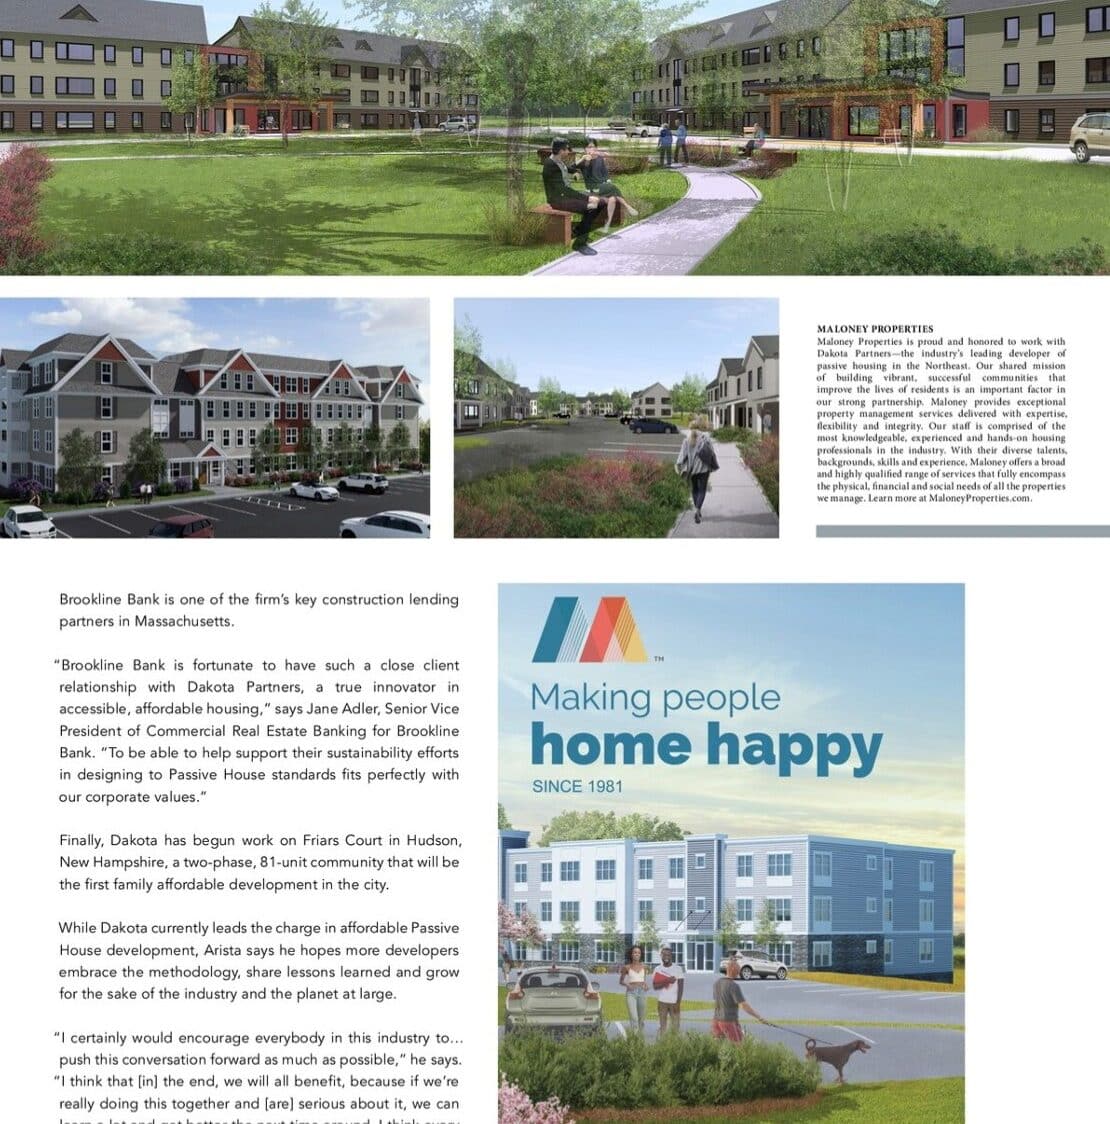 Dakota Featured in Affordable Housing News – Named The Most Active Developer of Passive House Affordable Housing in the Industry